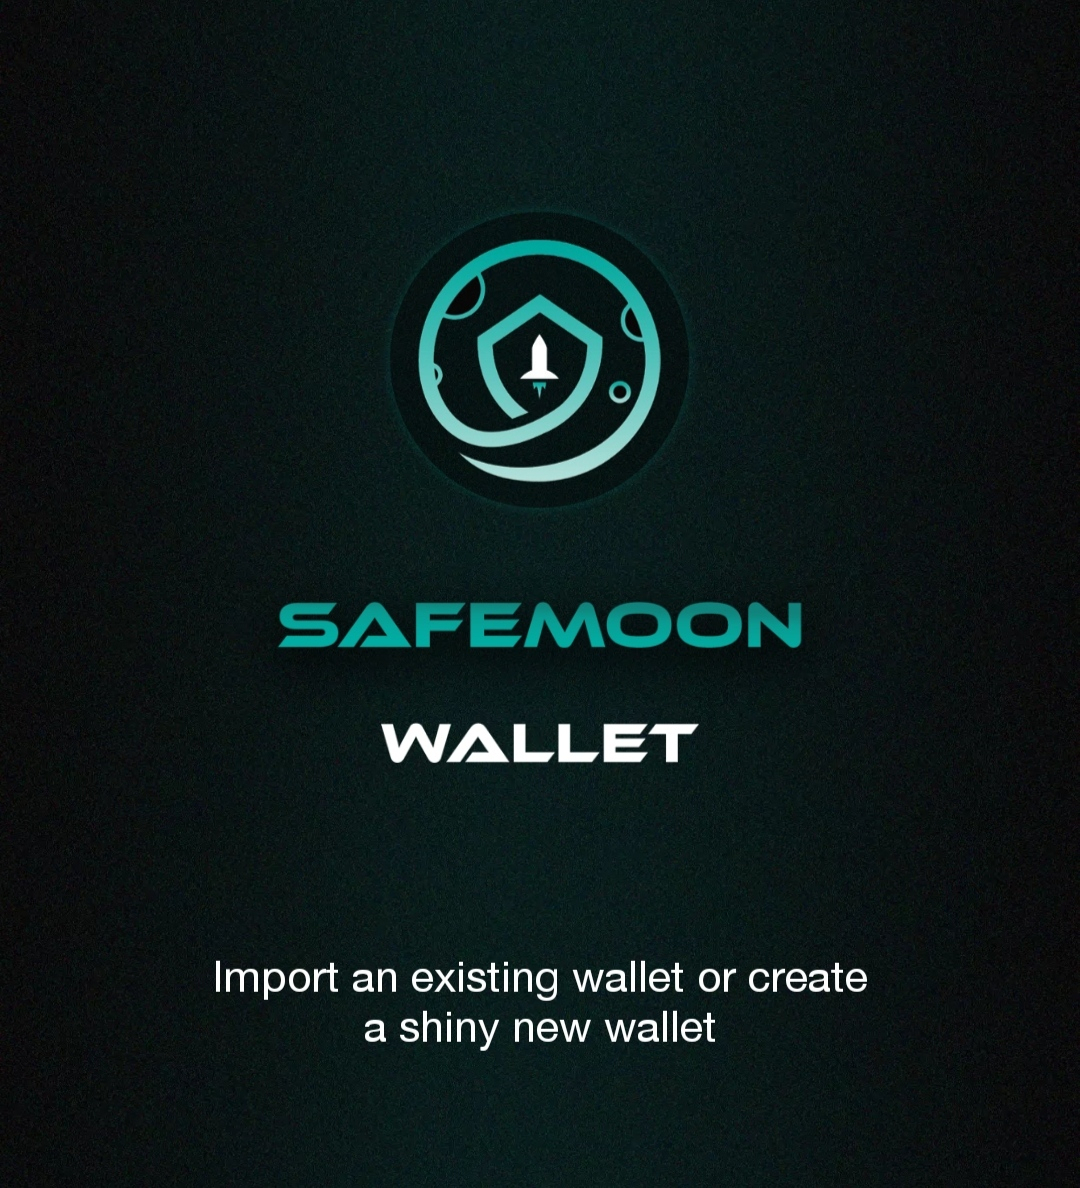 Safemoon wallet